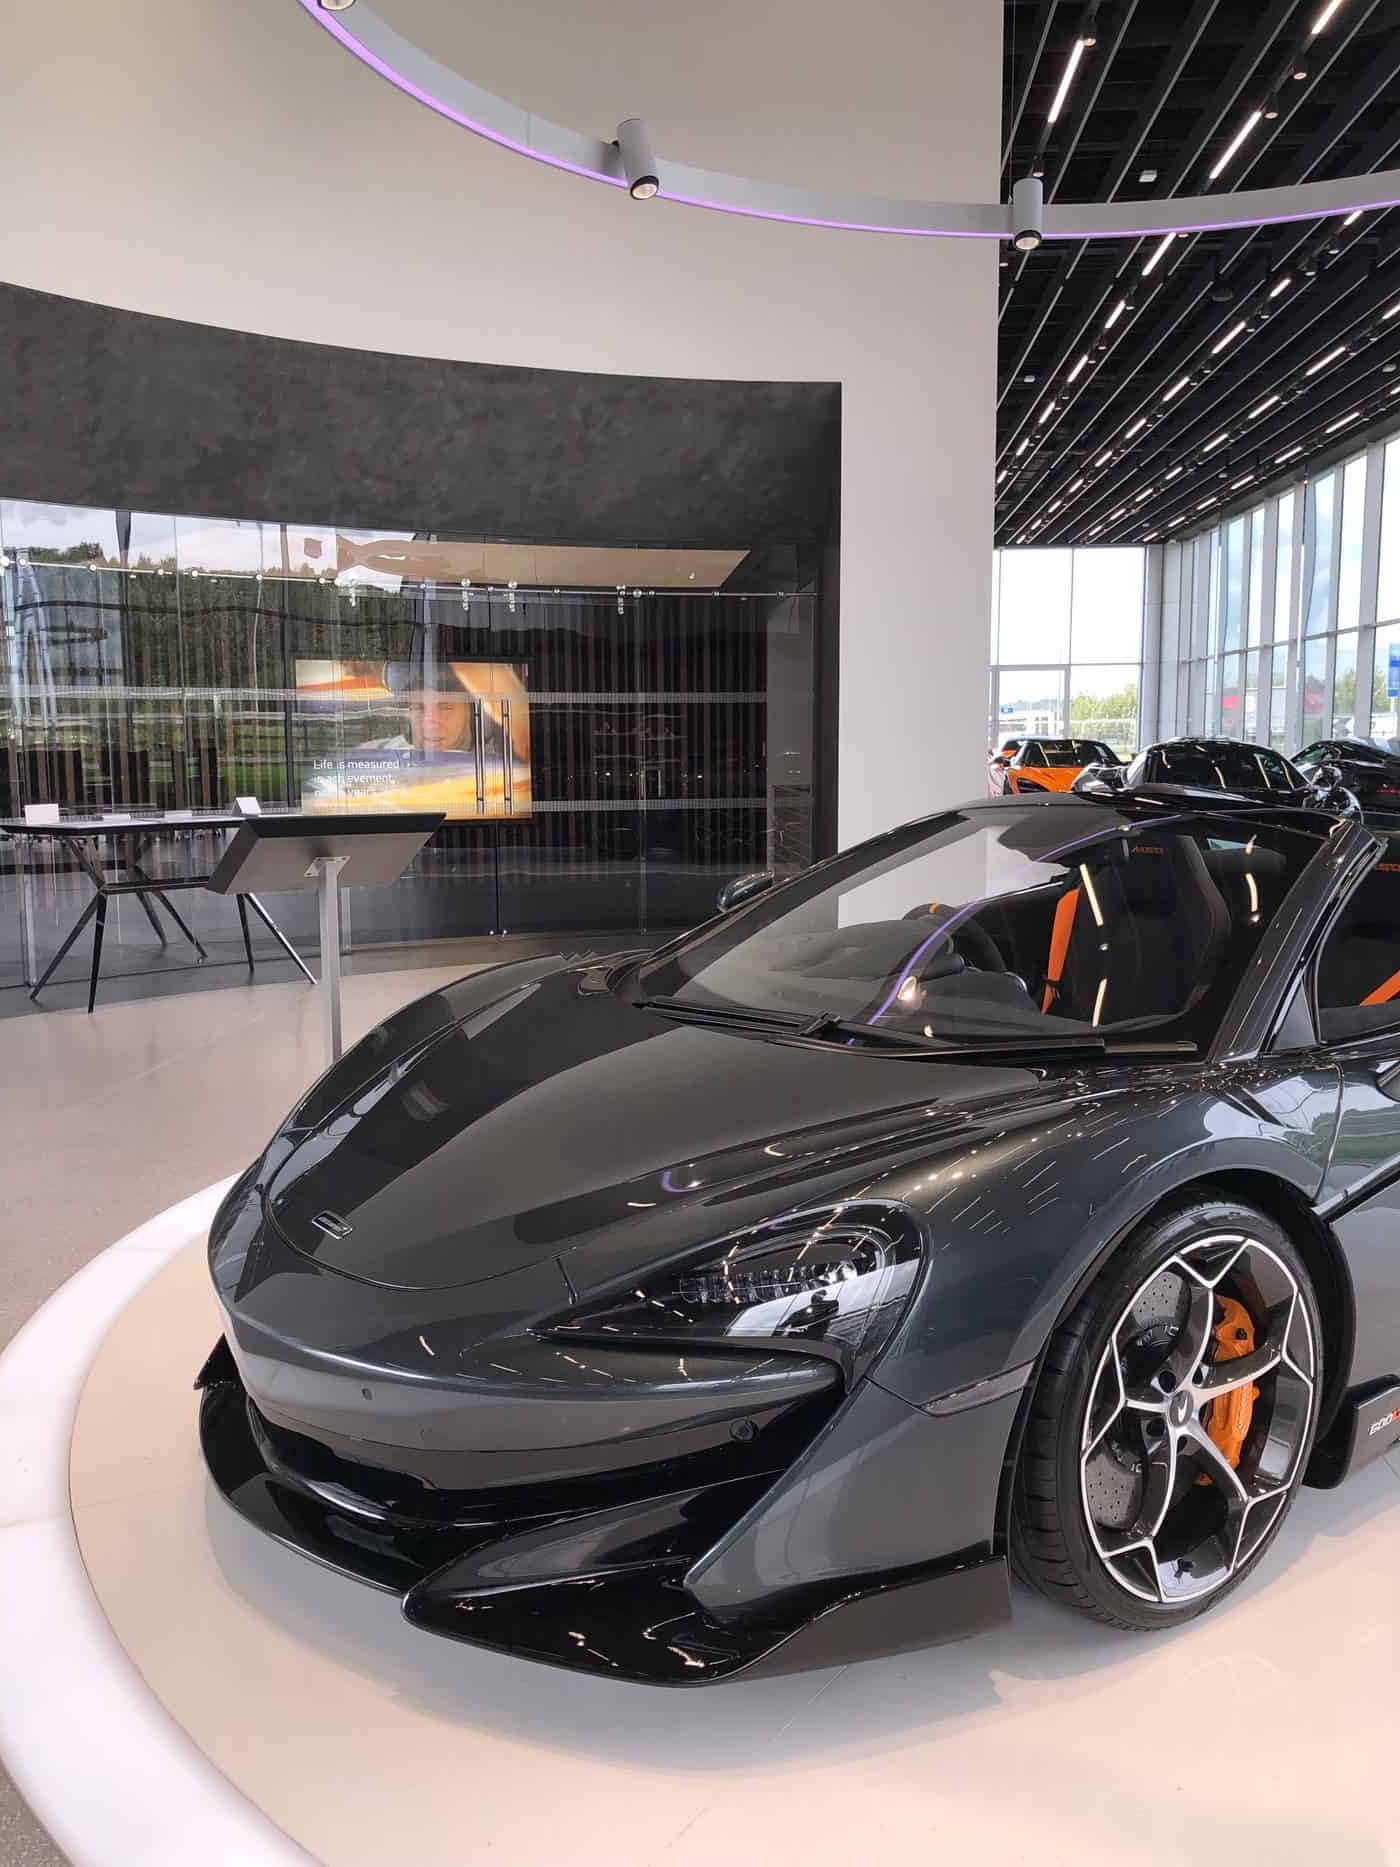 McLaren in Leeds? Dream supercars and our super detailed installation!